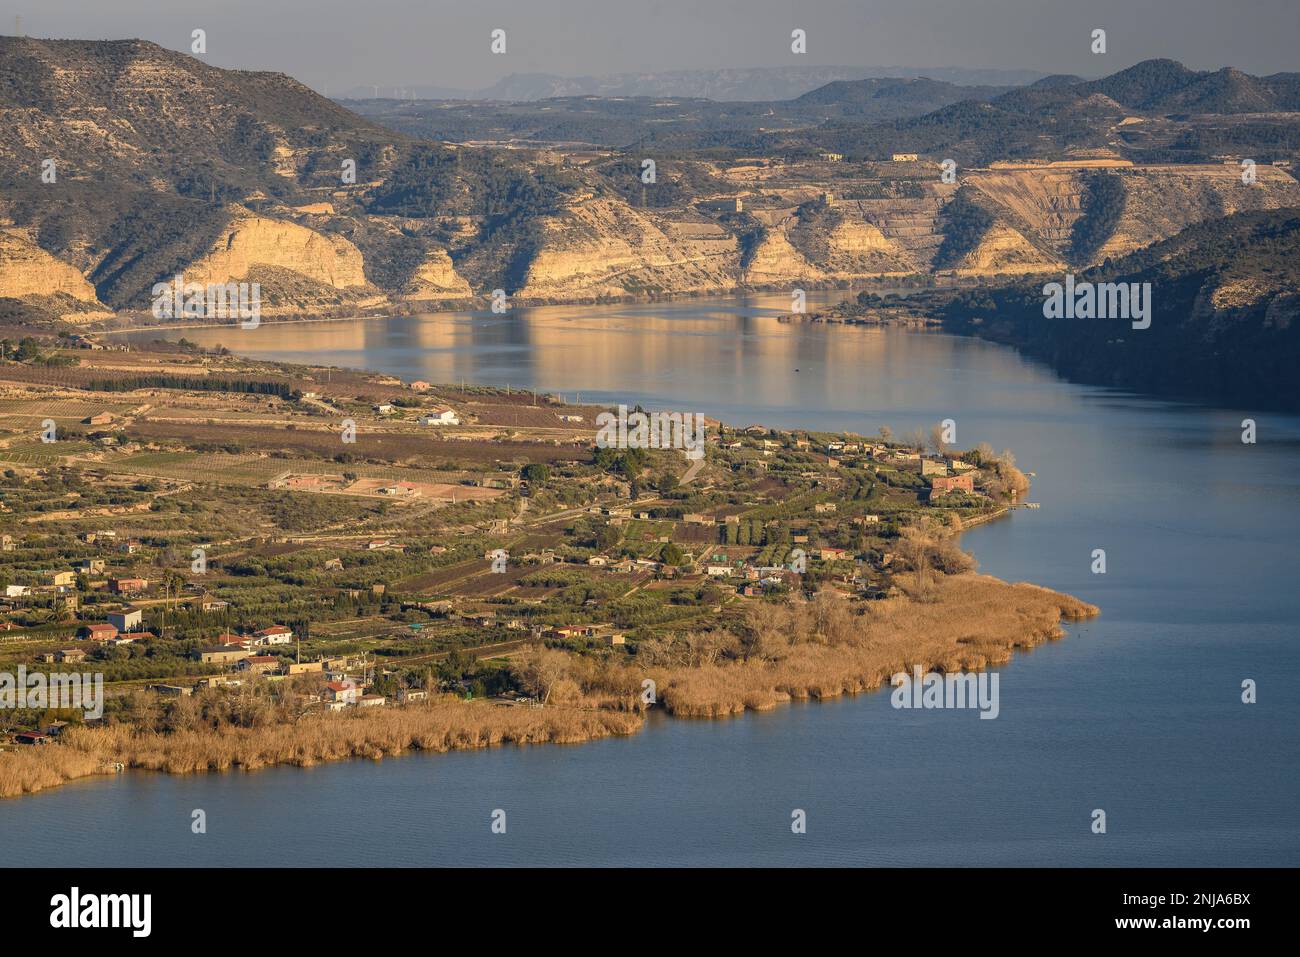 Confluence of the Segre and Ebro rivers at their junction in Mequinenza and the tail of the Riba-roja reservoir at sunset, Bajo Cinca, Zaragoza, Spain Stock Photo